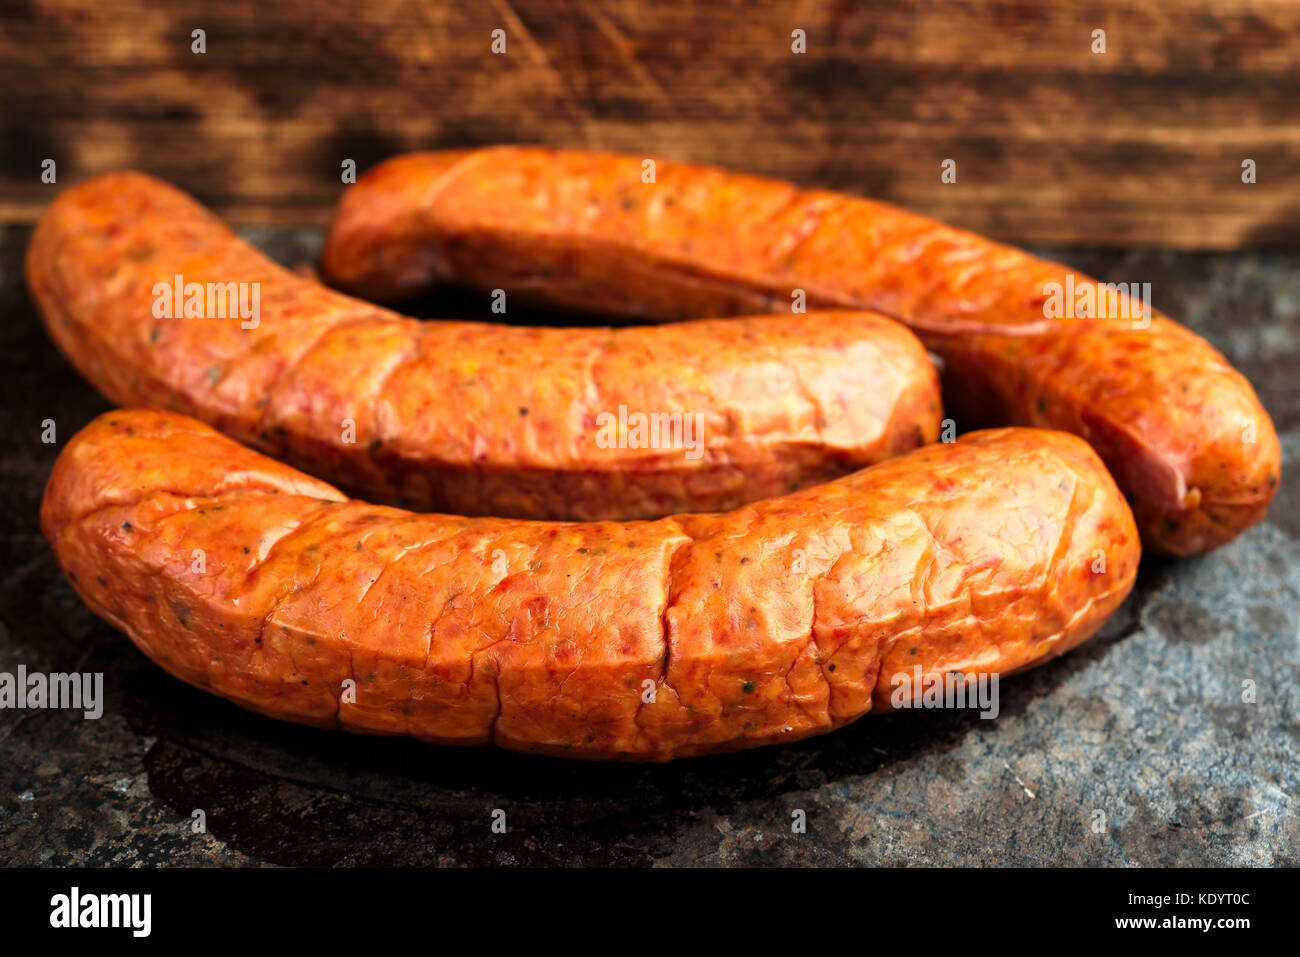 Three deliciously smoked handmade Swedish Isterband sausages with natural casing. Stock Photo